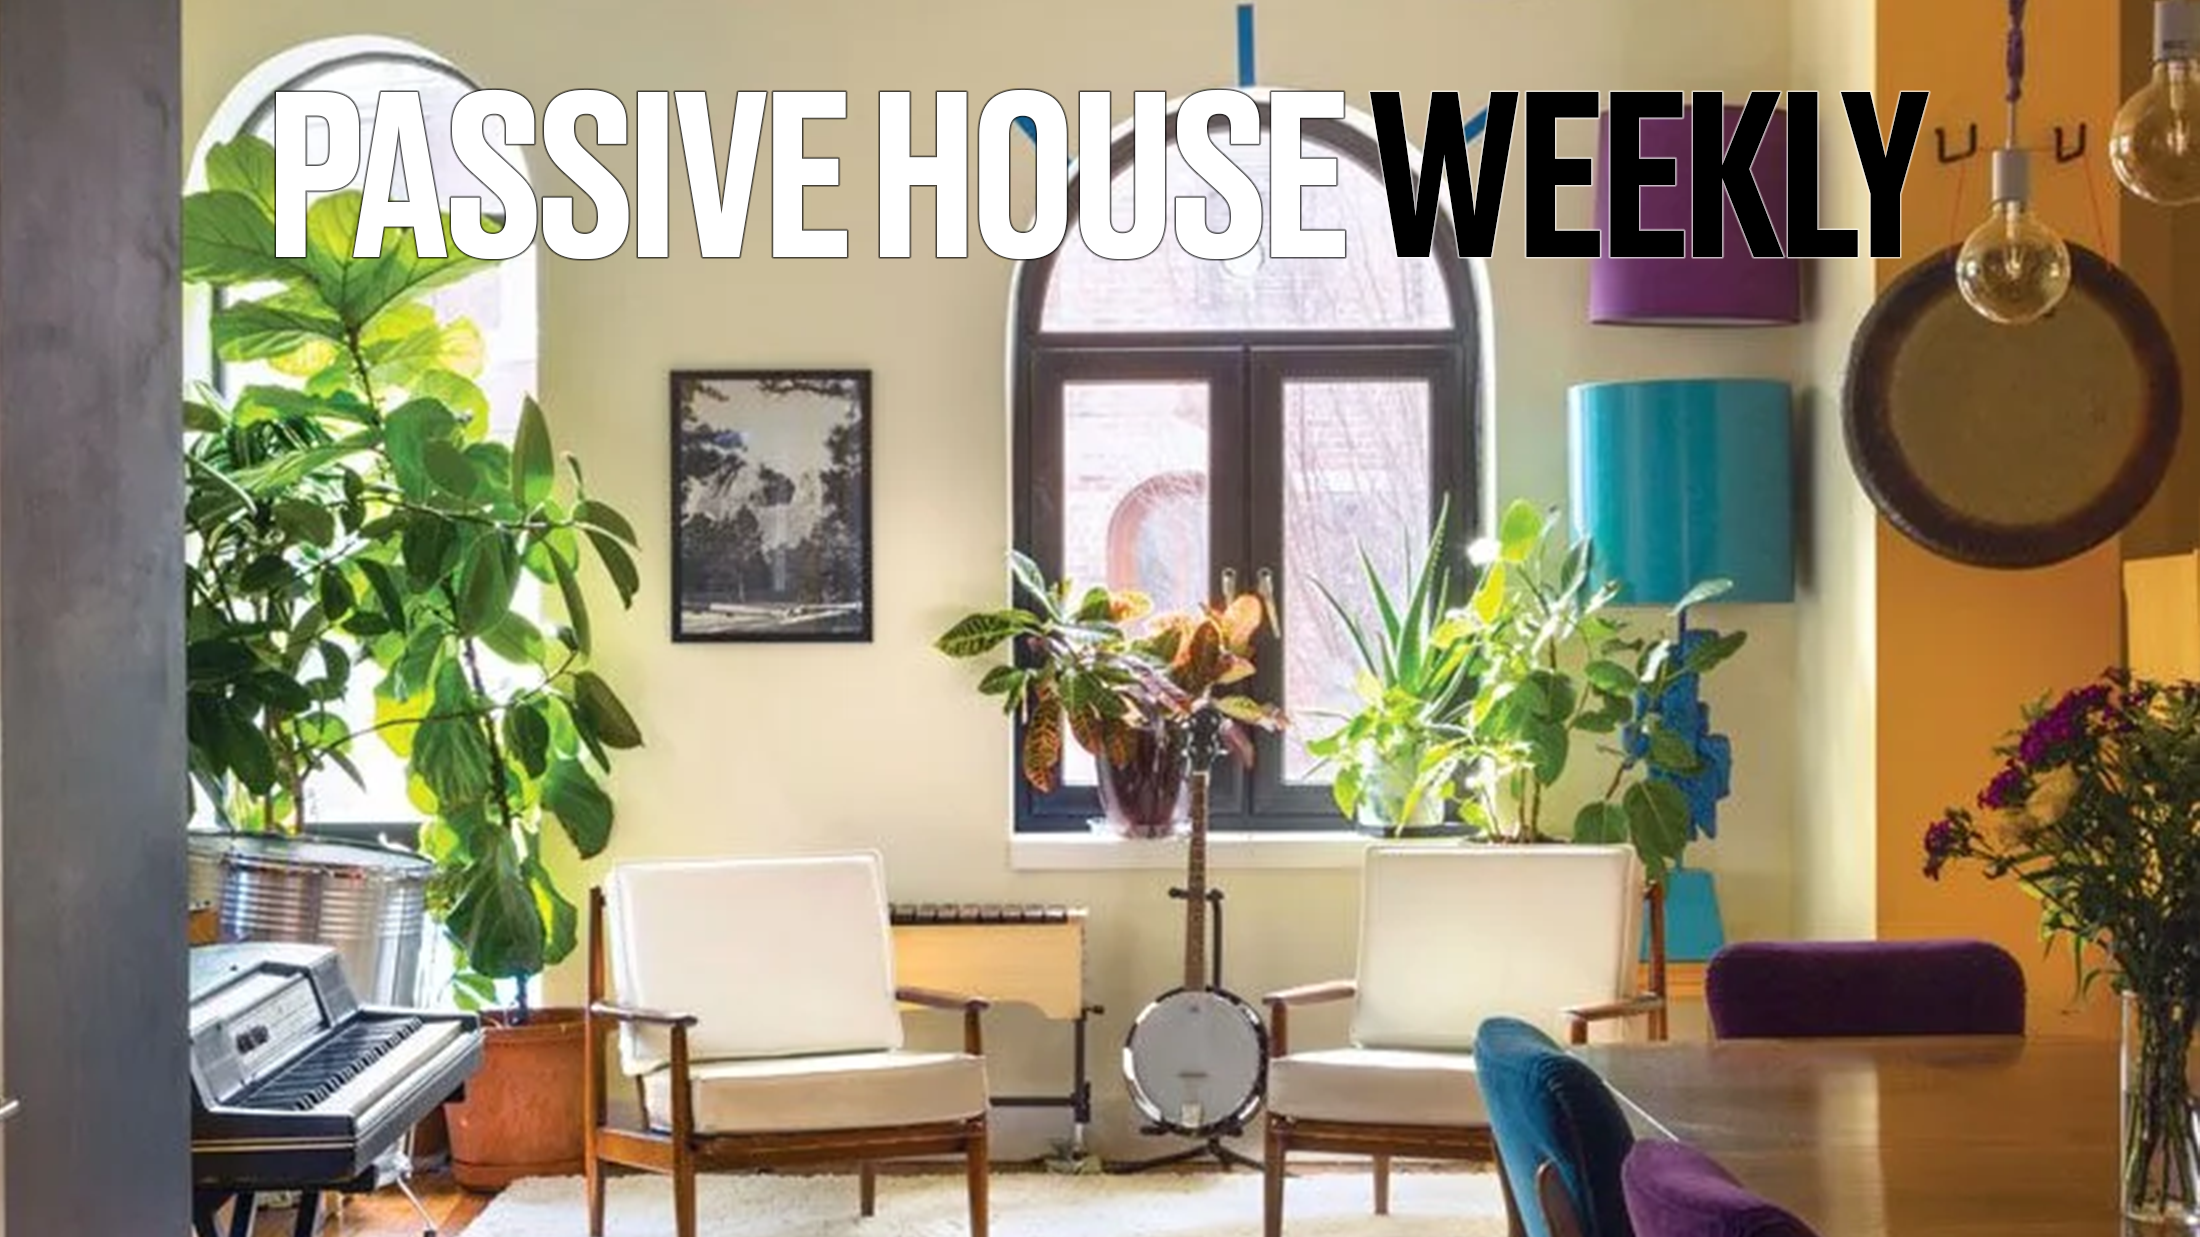 Passive House Weekly February 20th, 2022